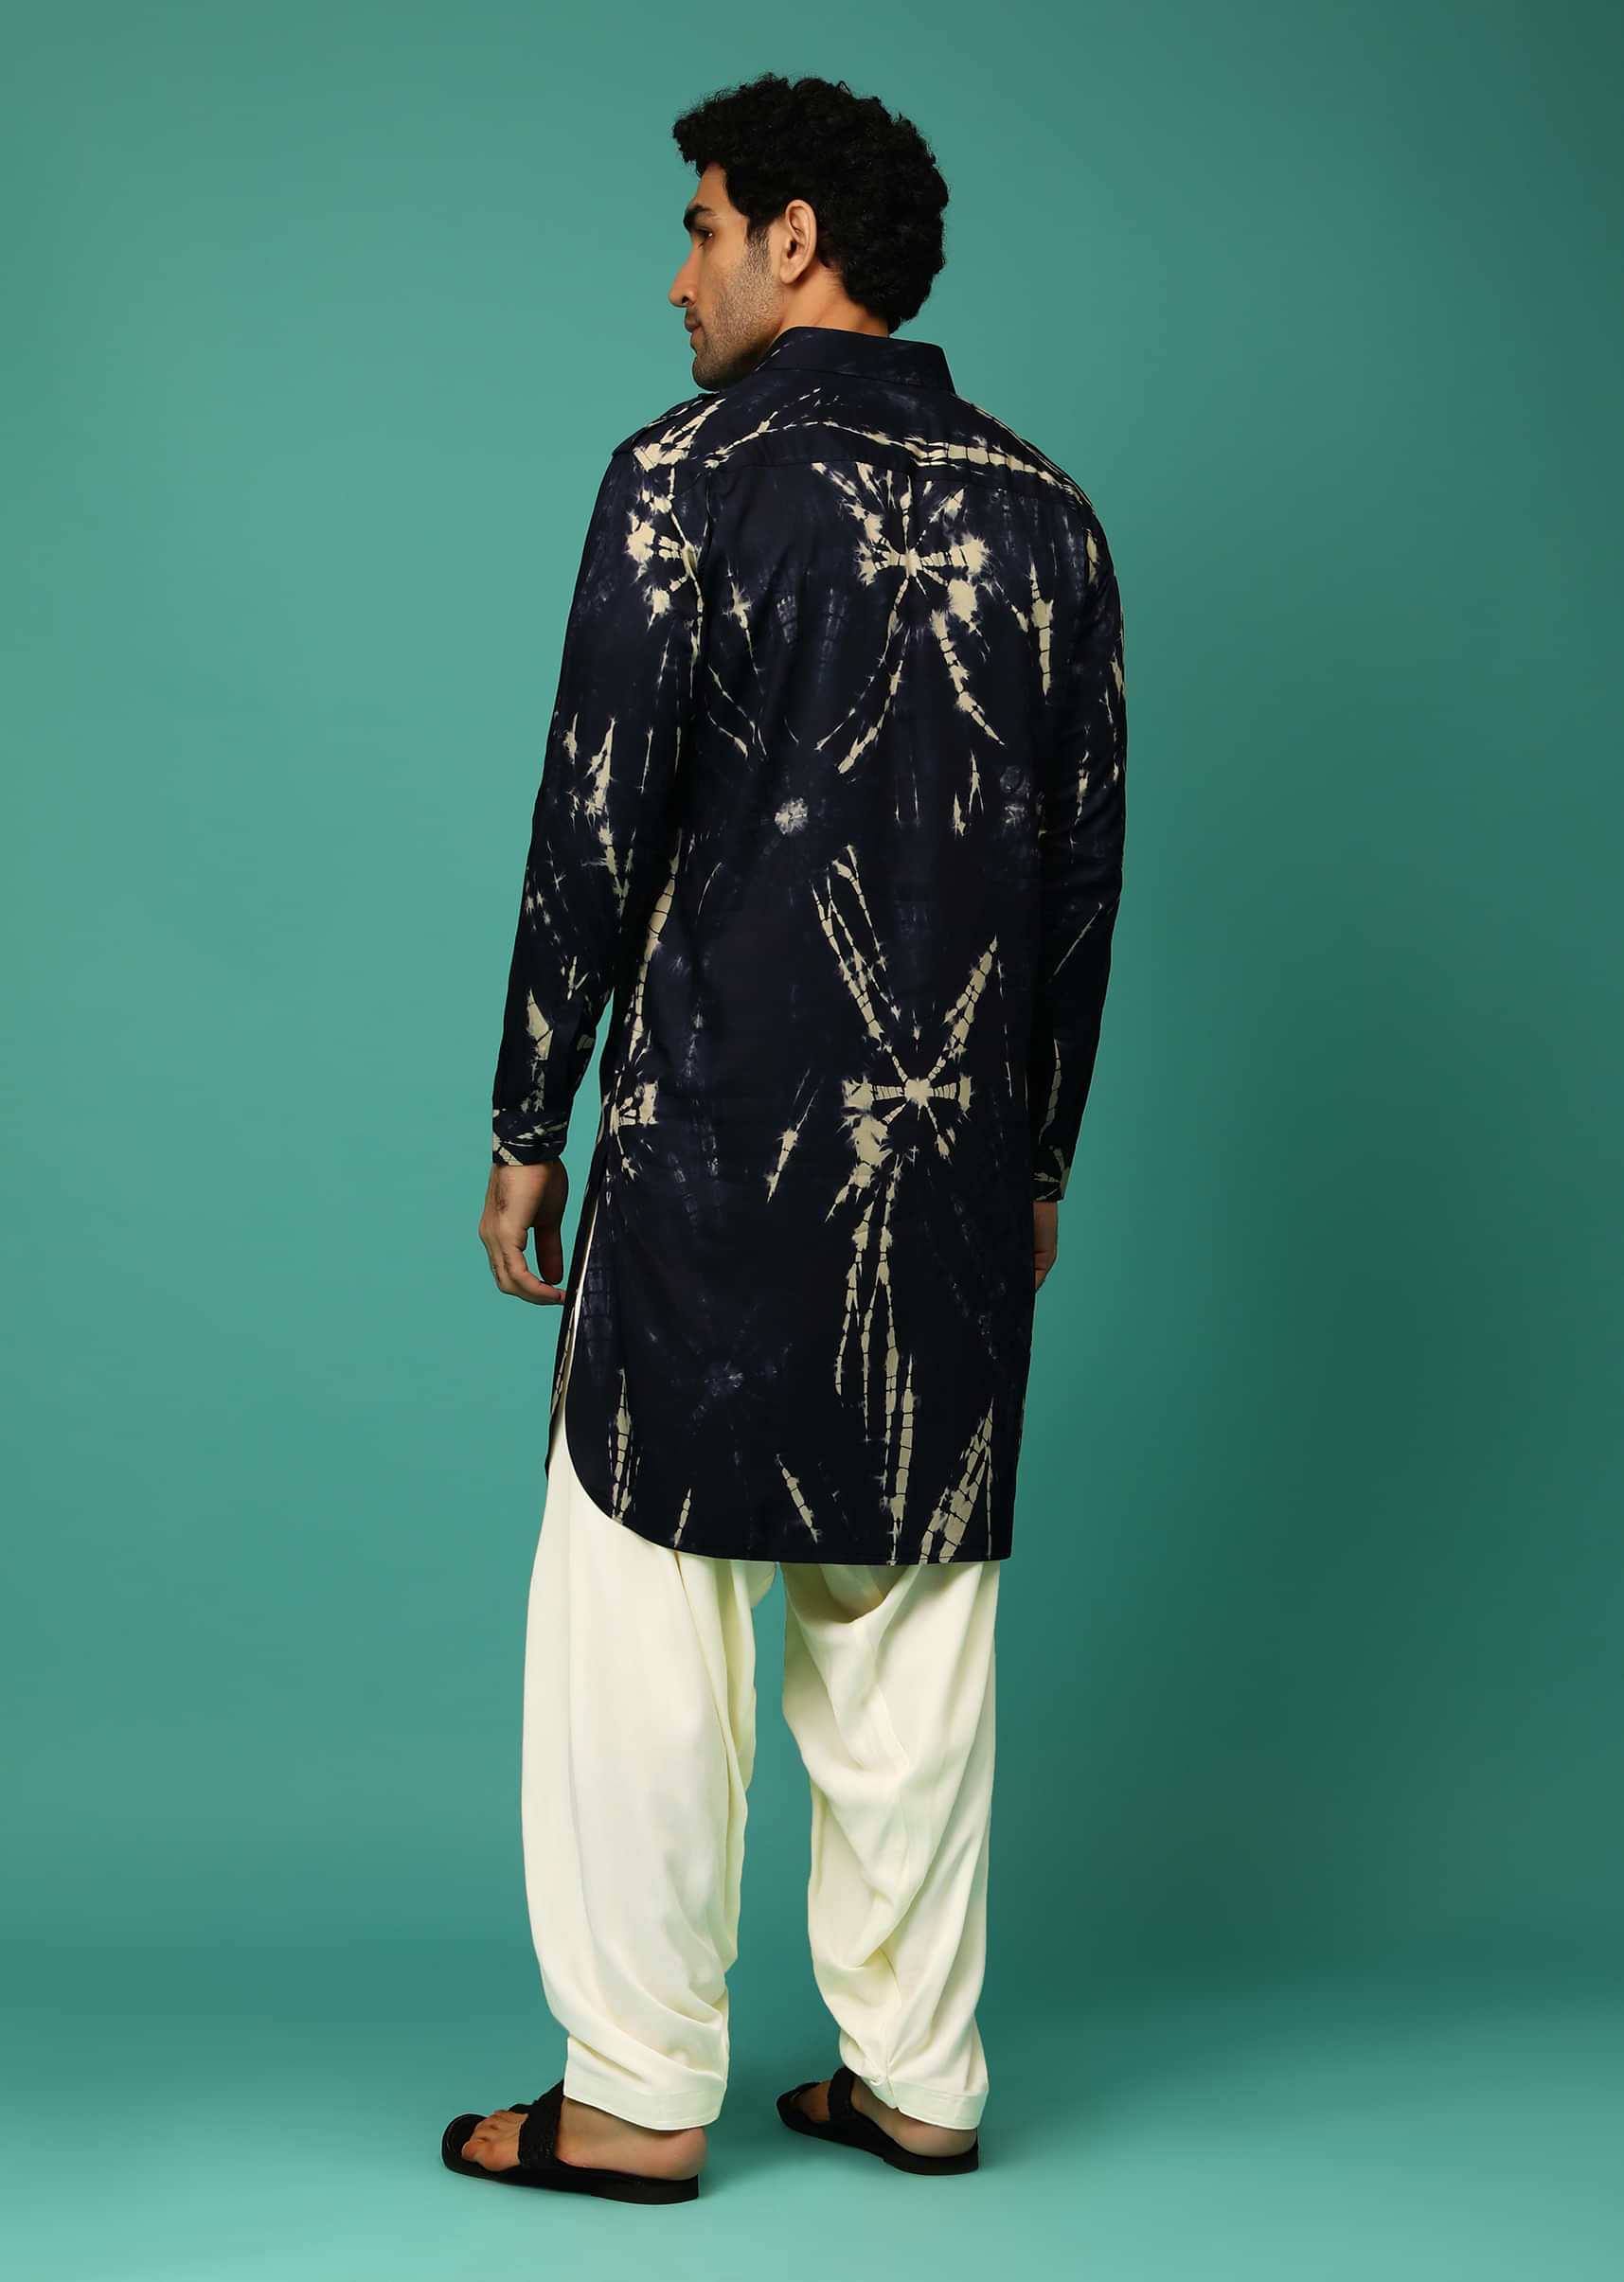 Midnight Blue And Cream Patiala Suit With Tie Dye Print And Pocket Detailing  